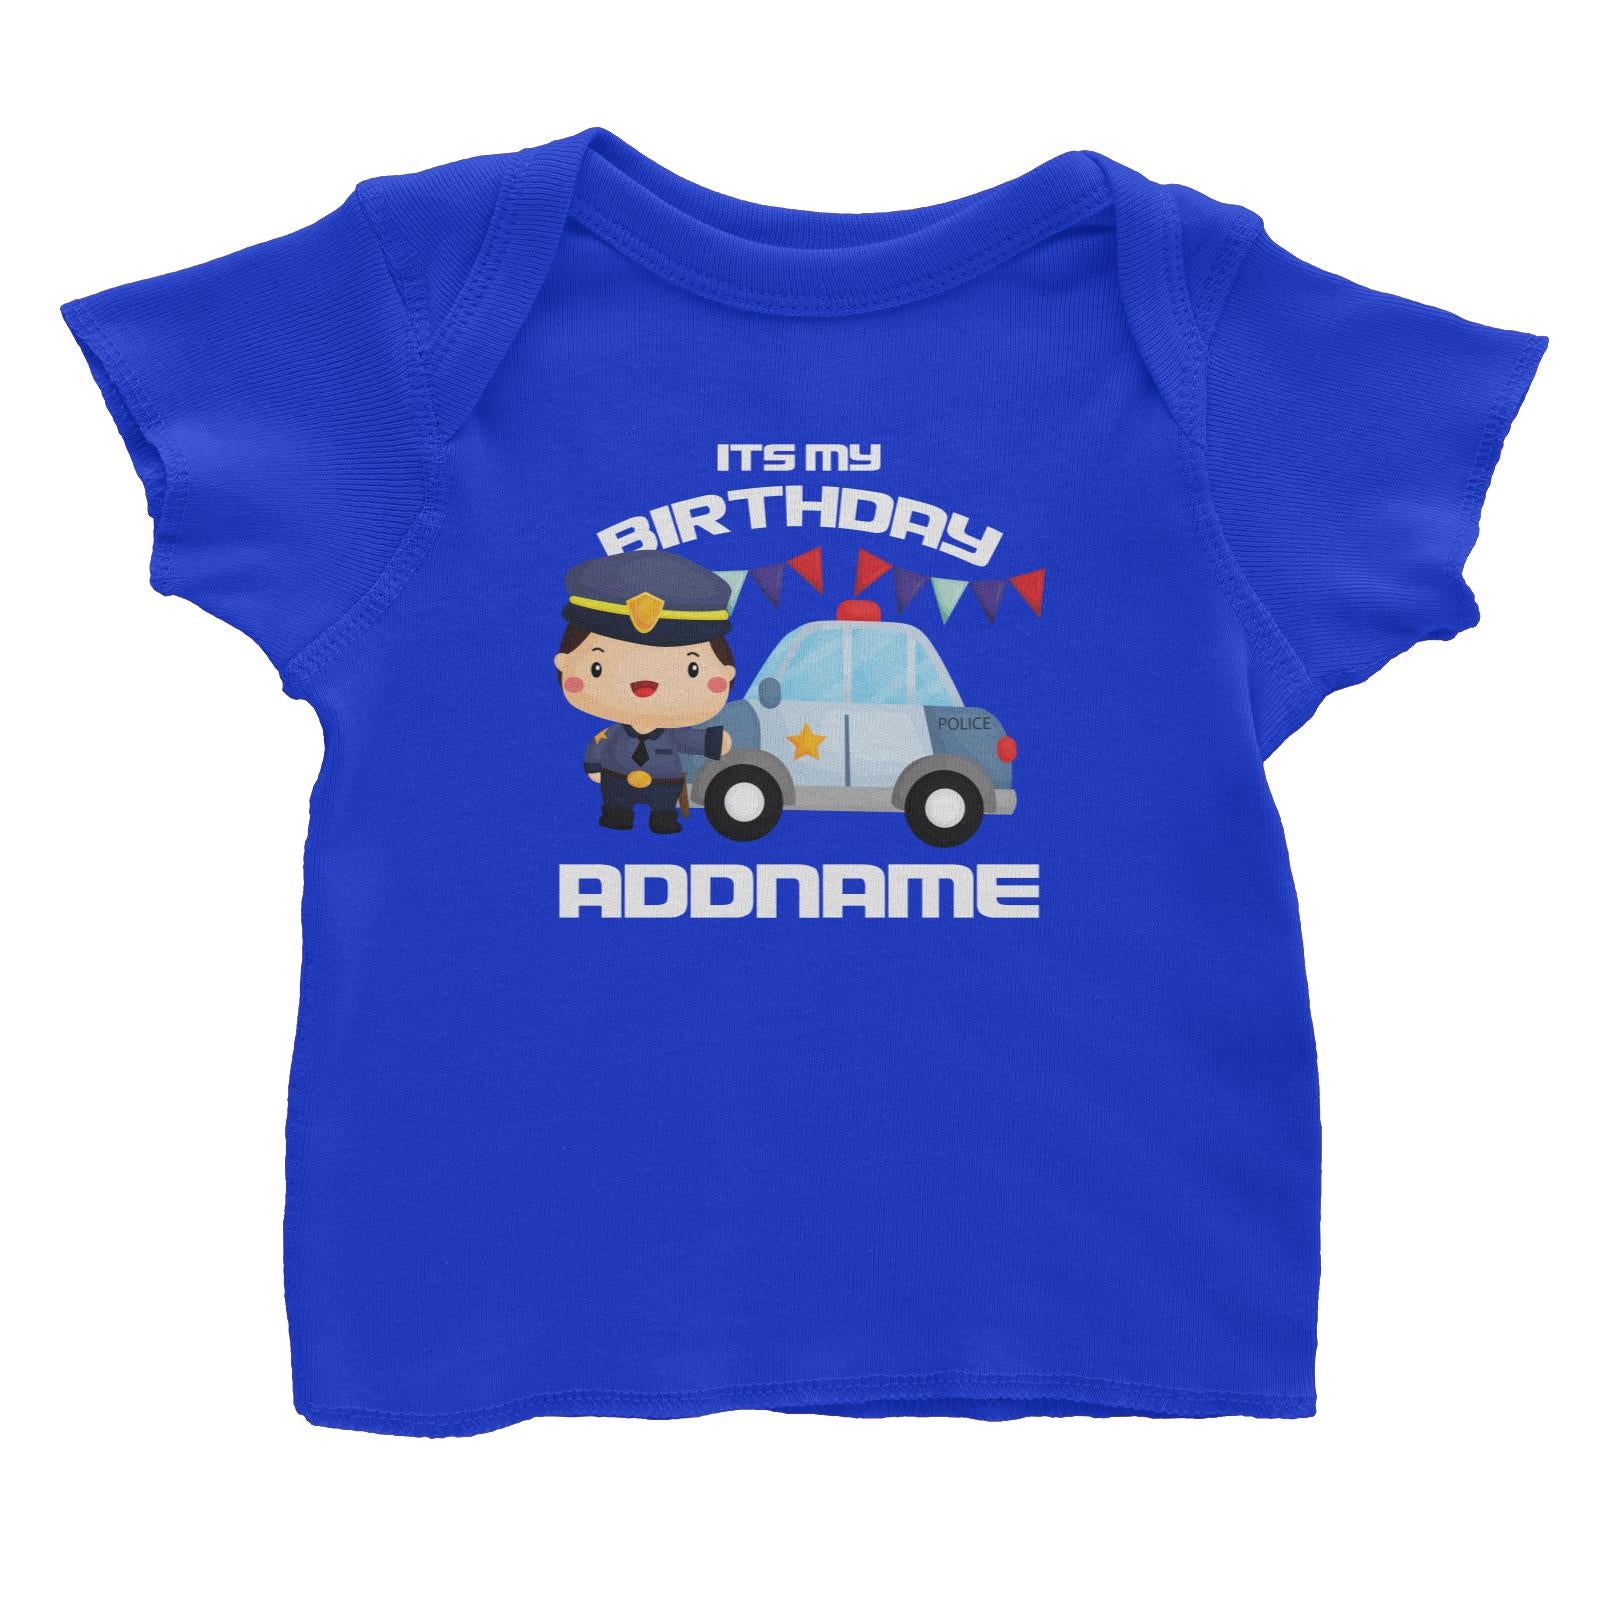 Birthday Police Officer Boy In Suit With Police Car Its My Birthday Addname Baby T-Shirt